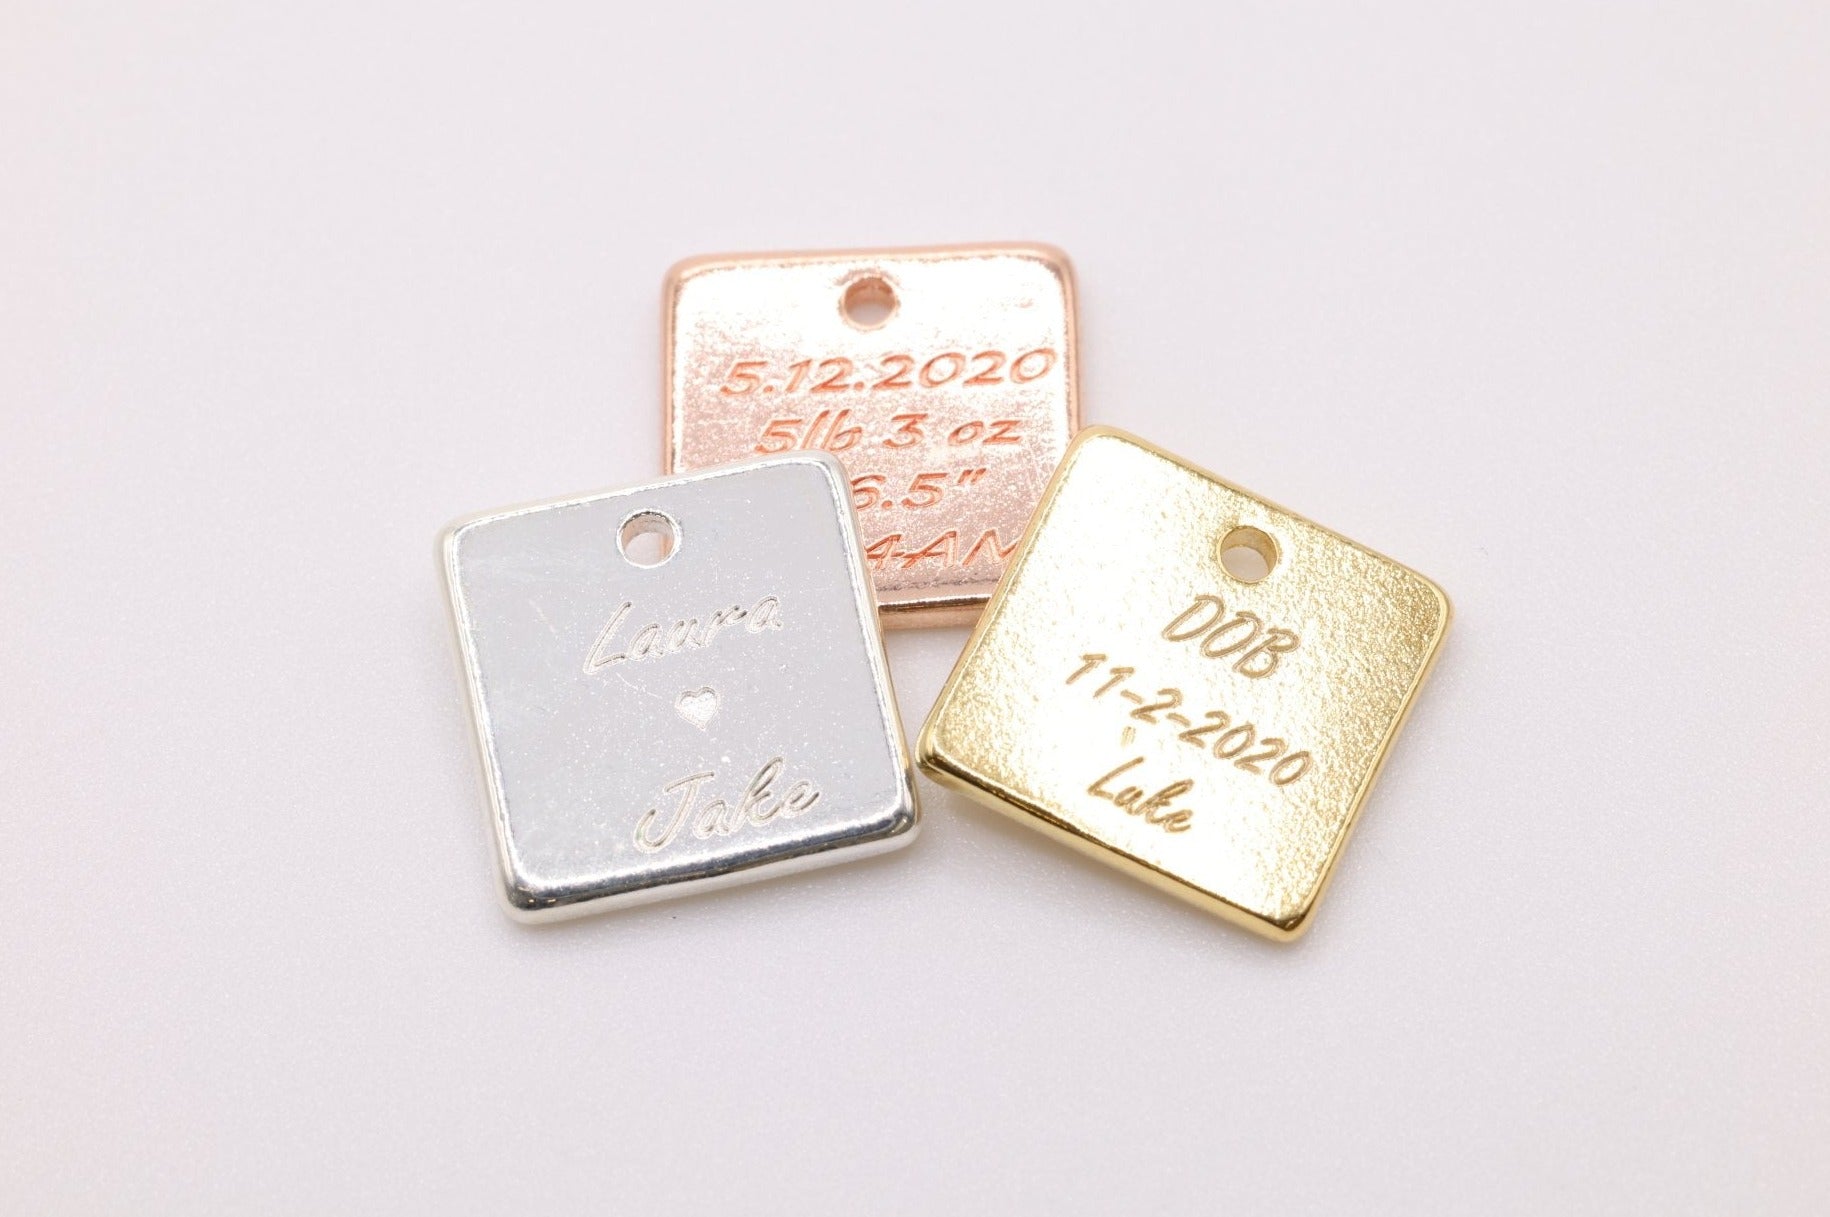 Engraved Square Charm, 925 Sterling Silver, Gold-Plated, Charm for Jewelry Making - HarperCrown